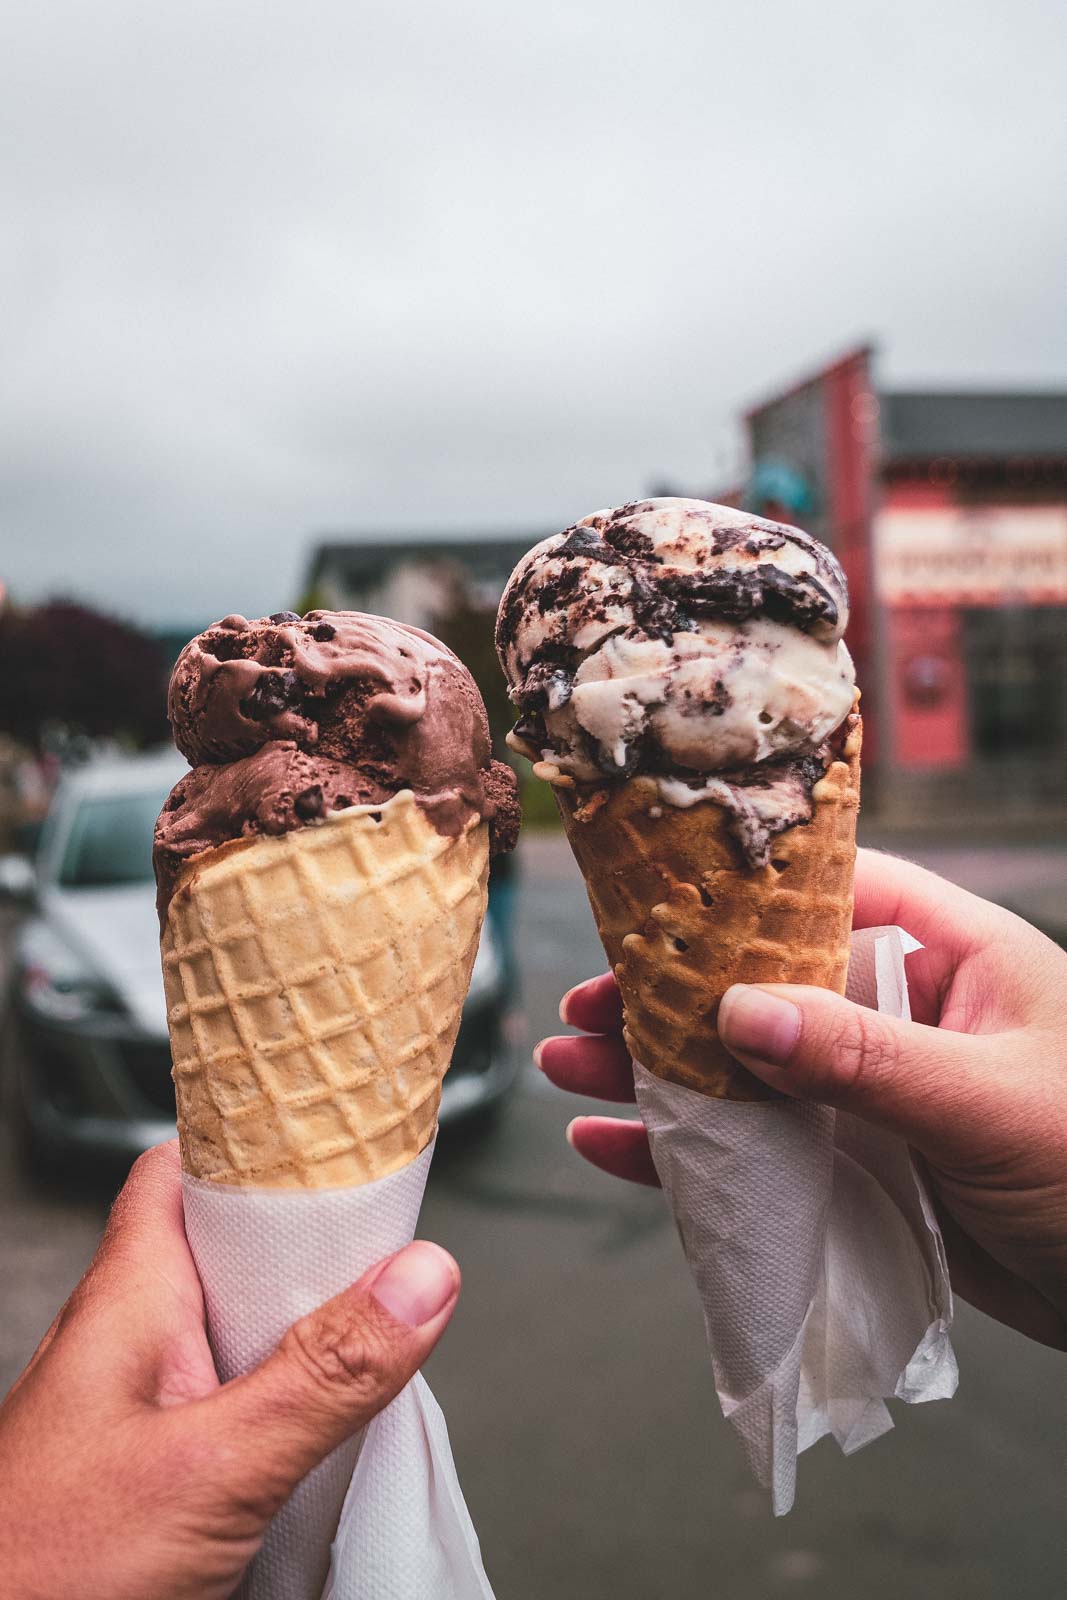 Two ice cream cones being held up in Seaside, Oregon